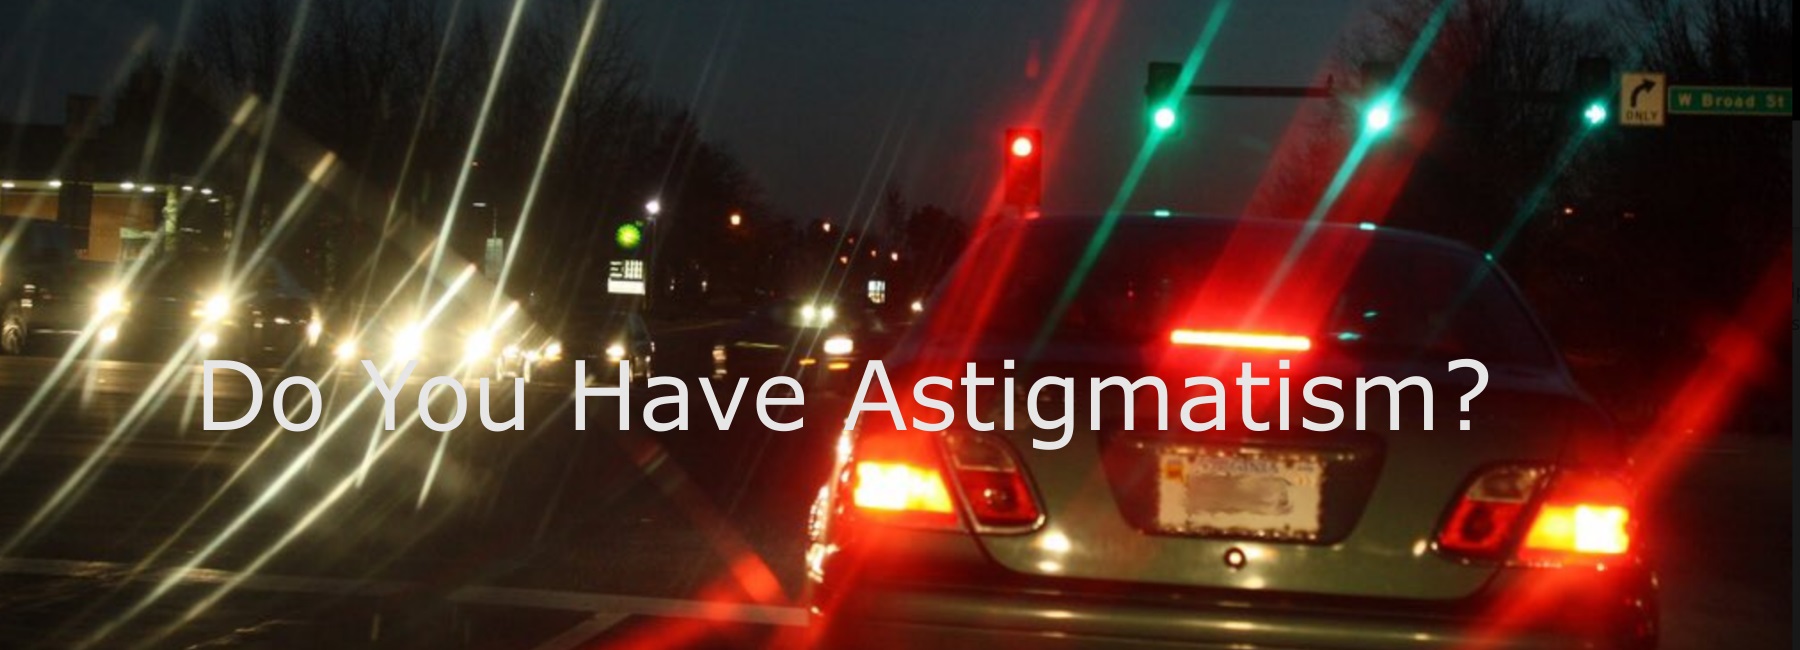 Do You Have Astigmatism?